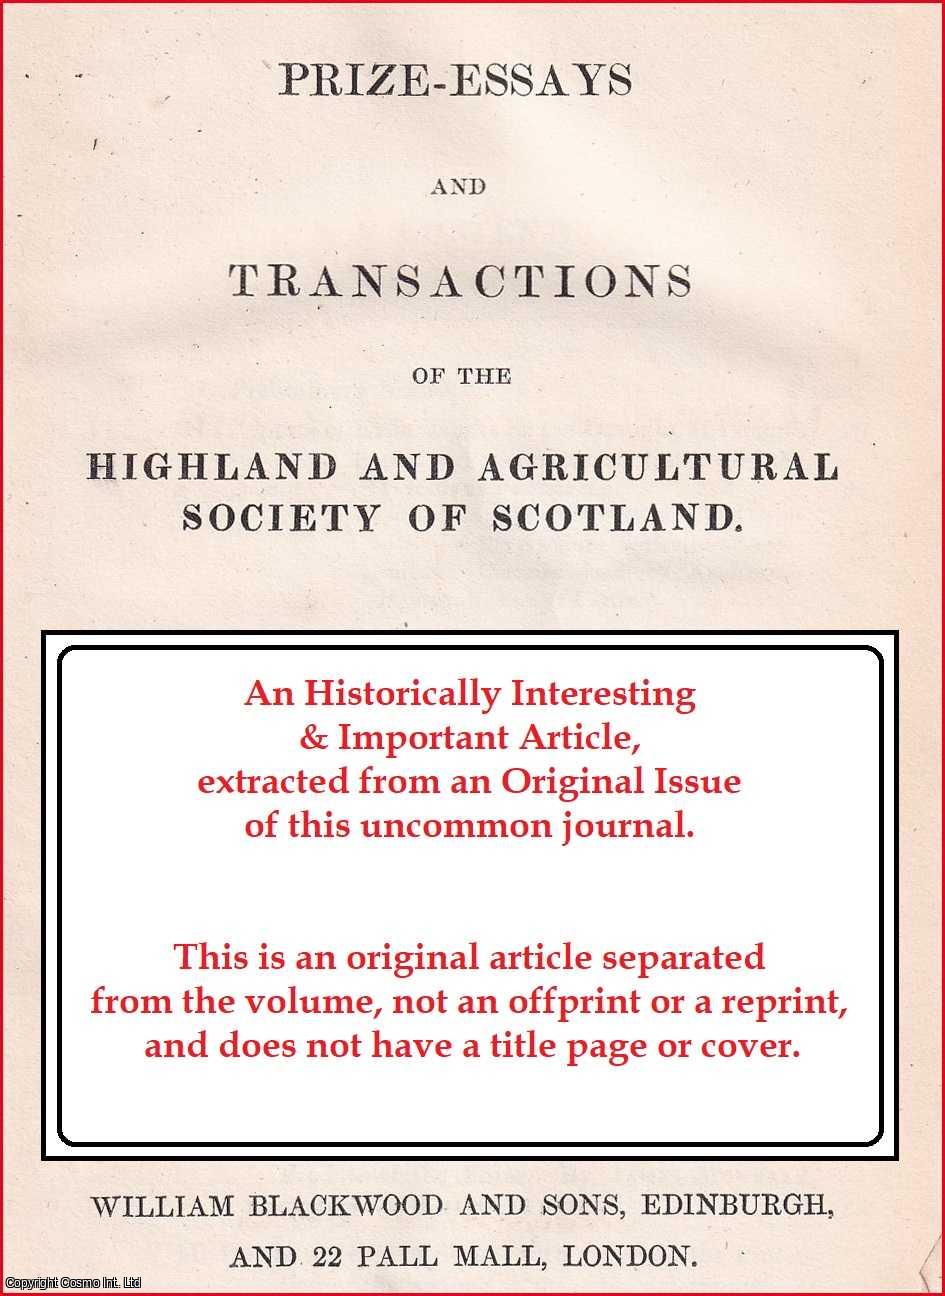 Mr. John Grigor, Nursery & Seedsman in Forres & others. - The Pruning of Forest Trees. An uncommon original article from the Prize Essays and Transactions of the Highland Society of Scotland, 1839.